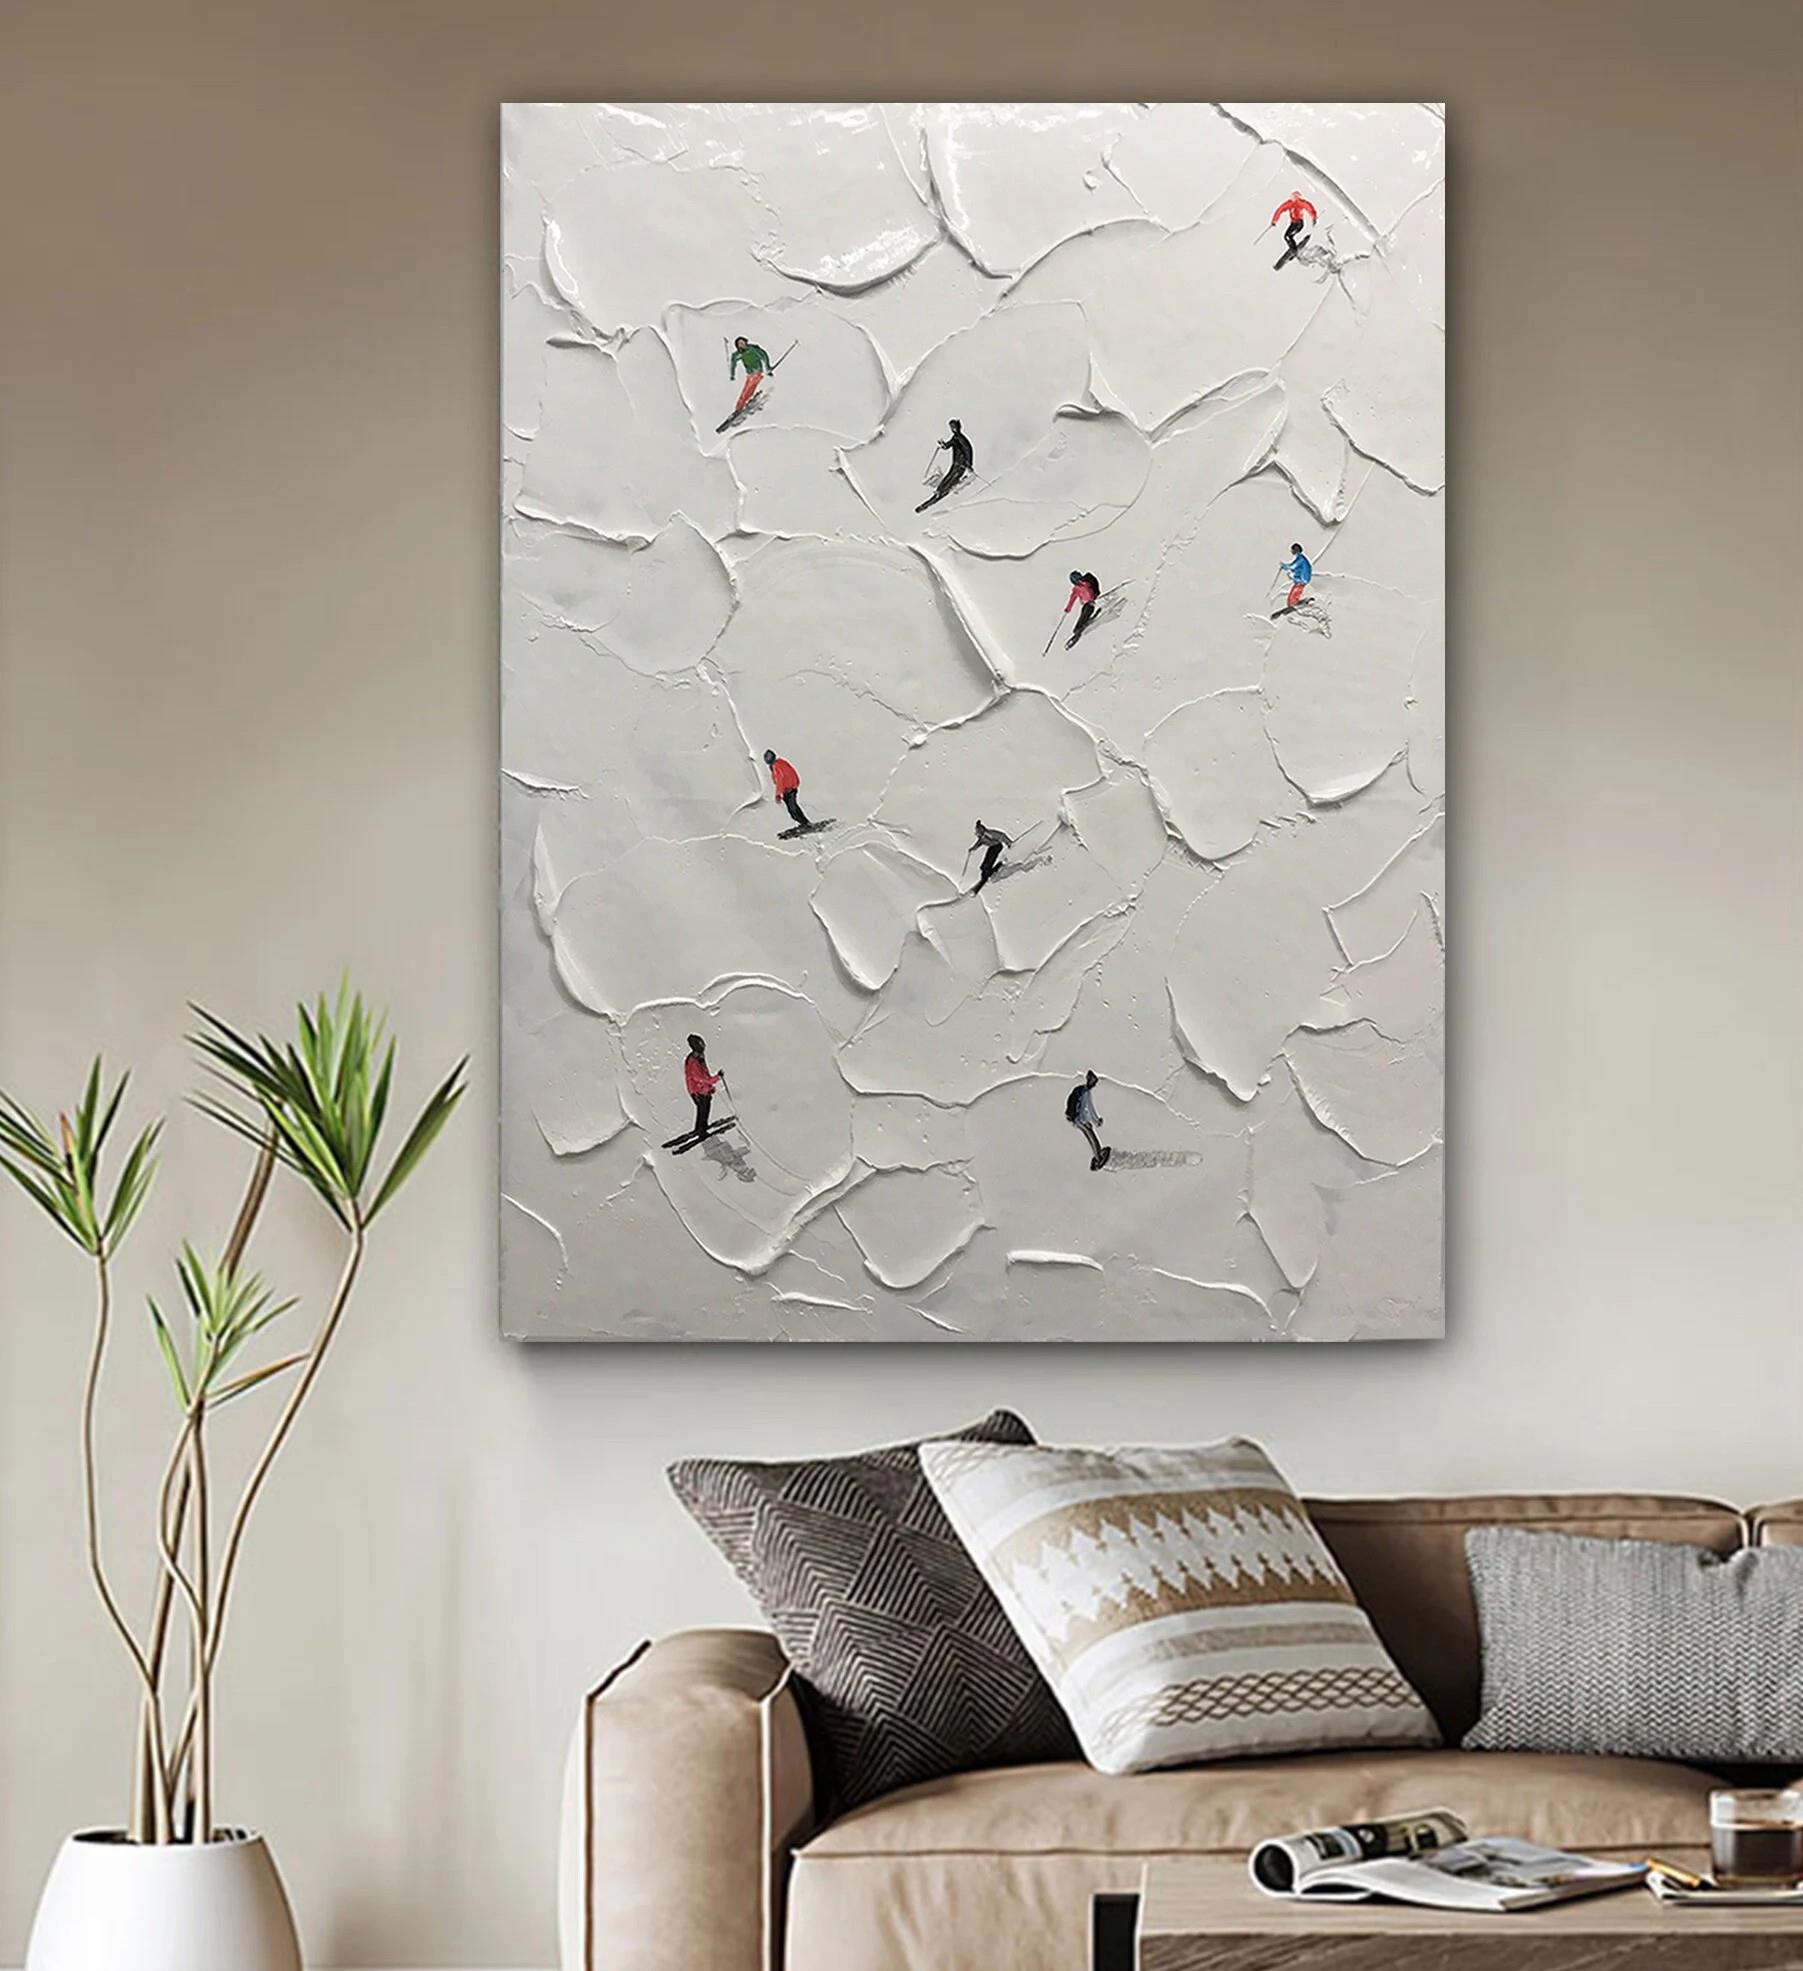 Skier on Snowy Mountain Wall Art Sport White Snow Skiing Room Decor by Knife 06 texture Oil Paintings